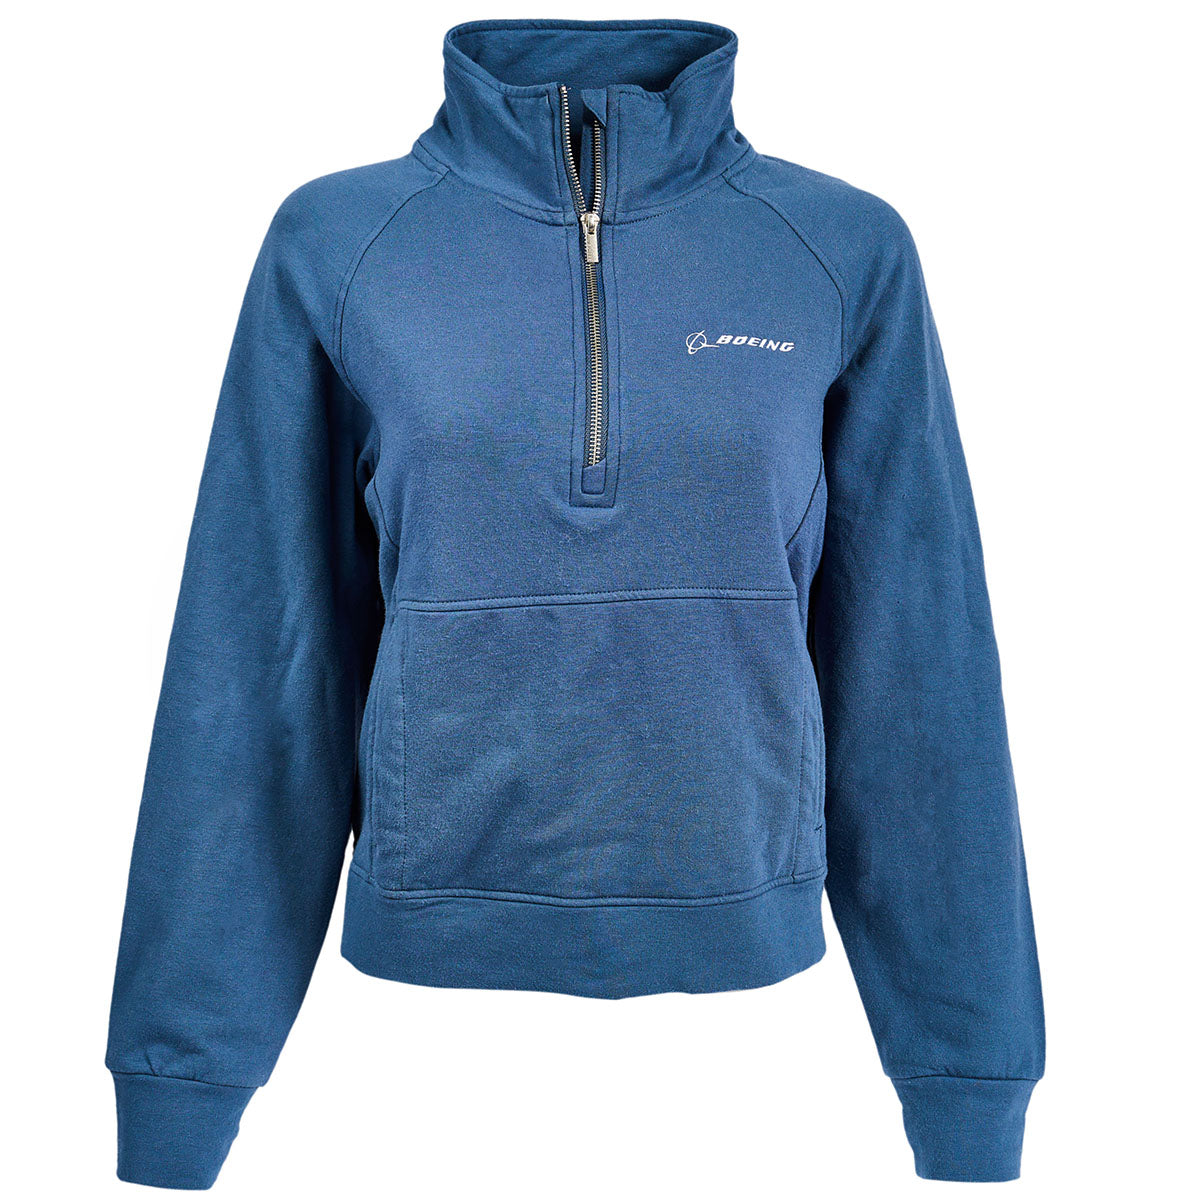 Glyder Boeing Women's Daily Quarter-Zip Pullover – The Boeing Store